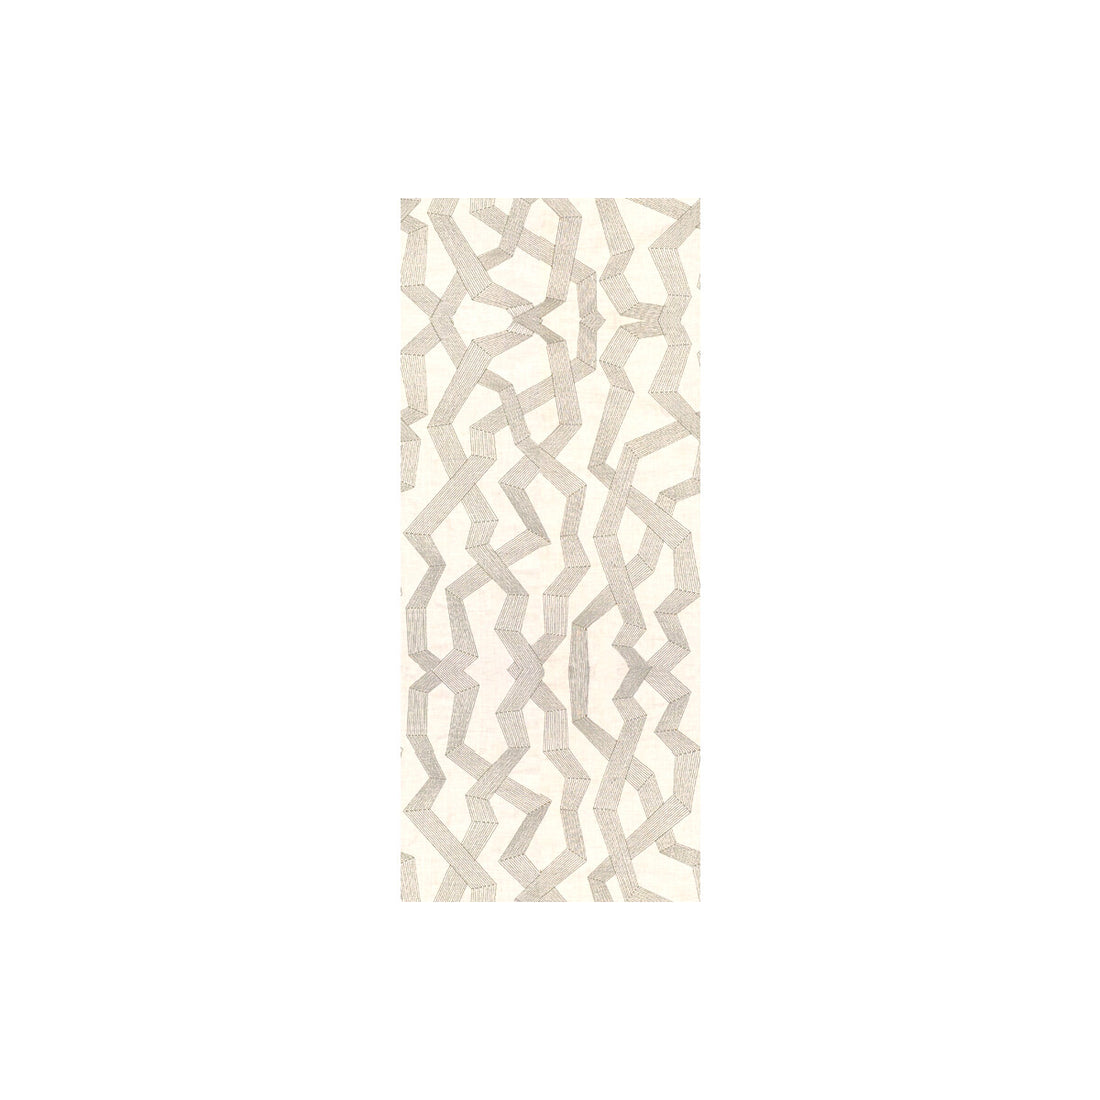 Soto fabric in sterling color - pattern 3949.11.0 - by Kravet Basics in the Jeffrey Alan Marks collection